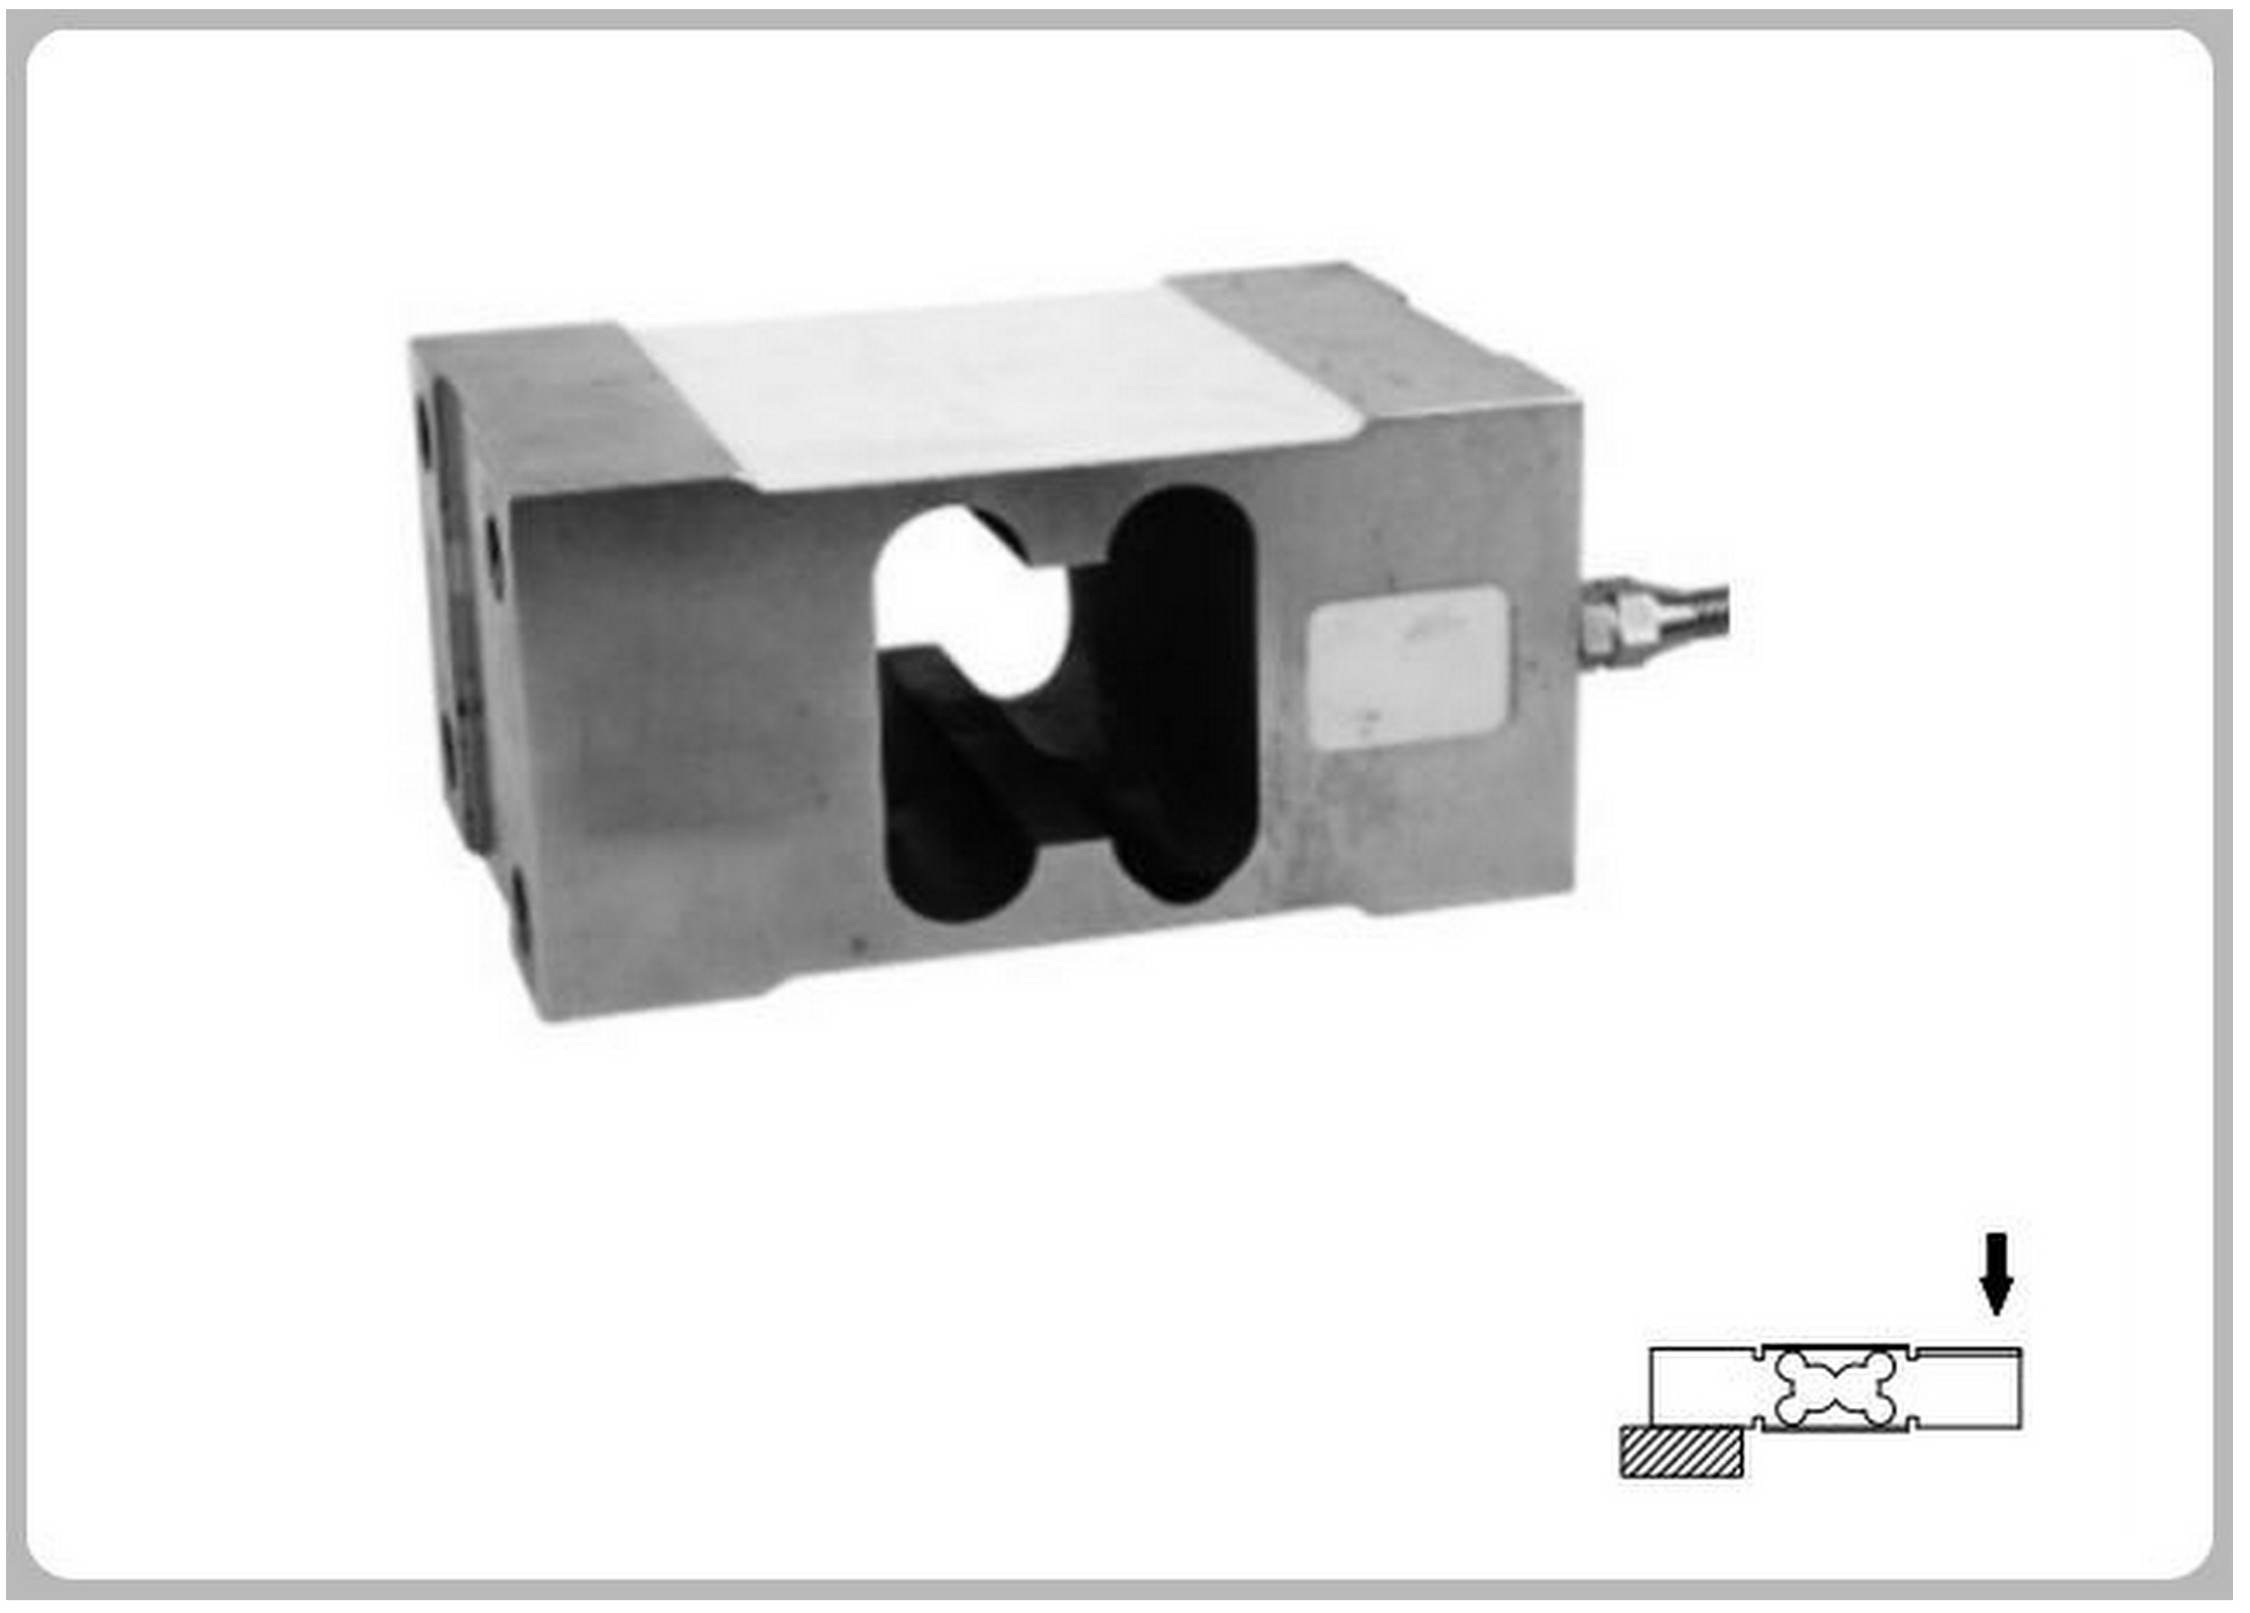 MC8830 LOAD CELL & FORCE TRANSDUCER